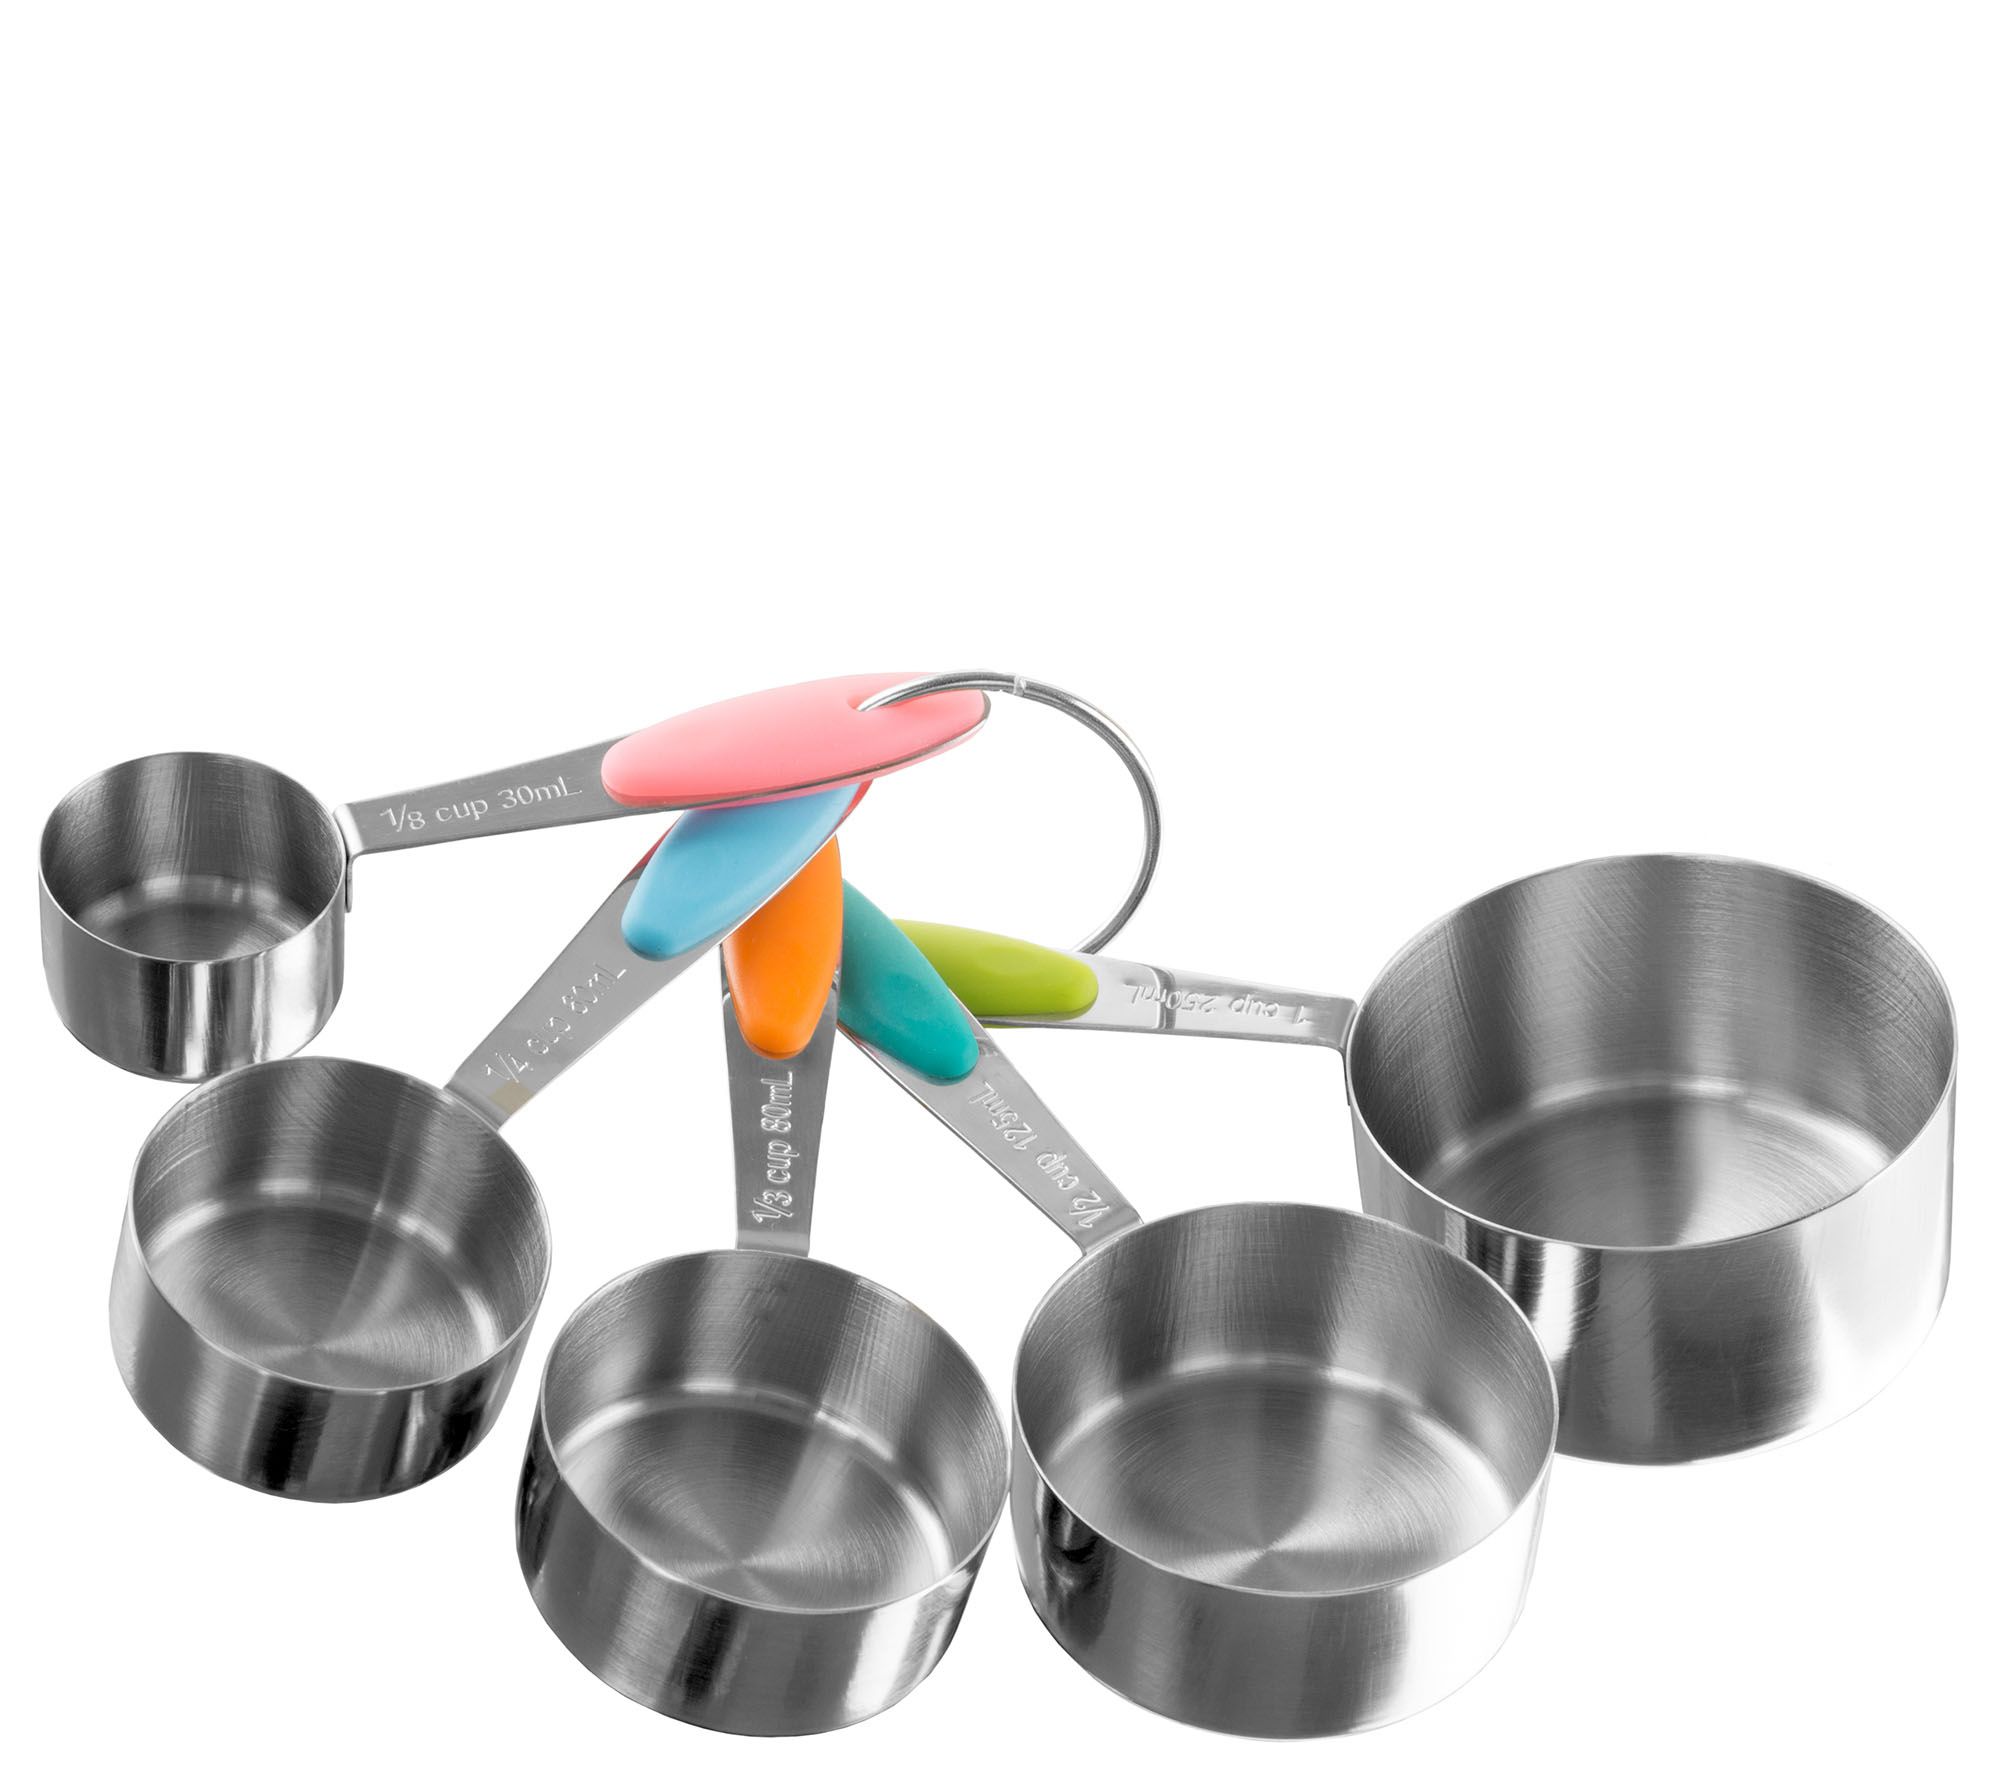 Le Creuset Stainless Steel Measuring Spoons Set of Five